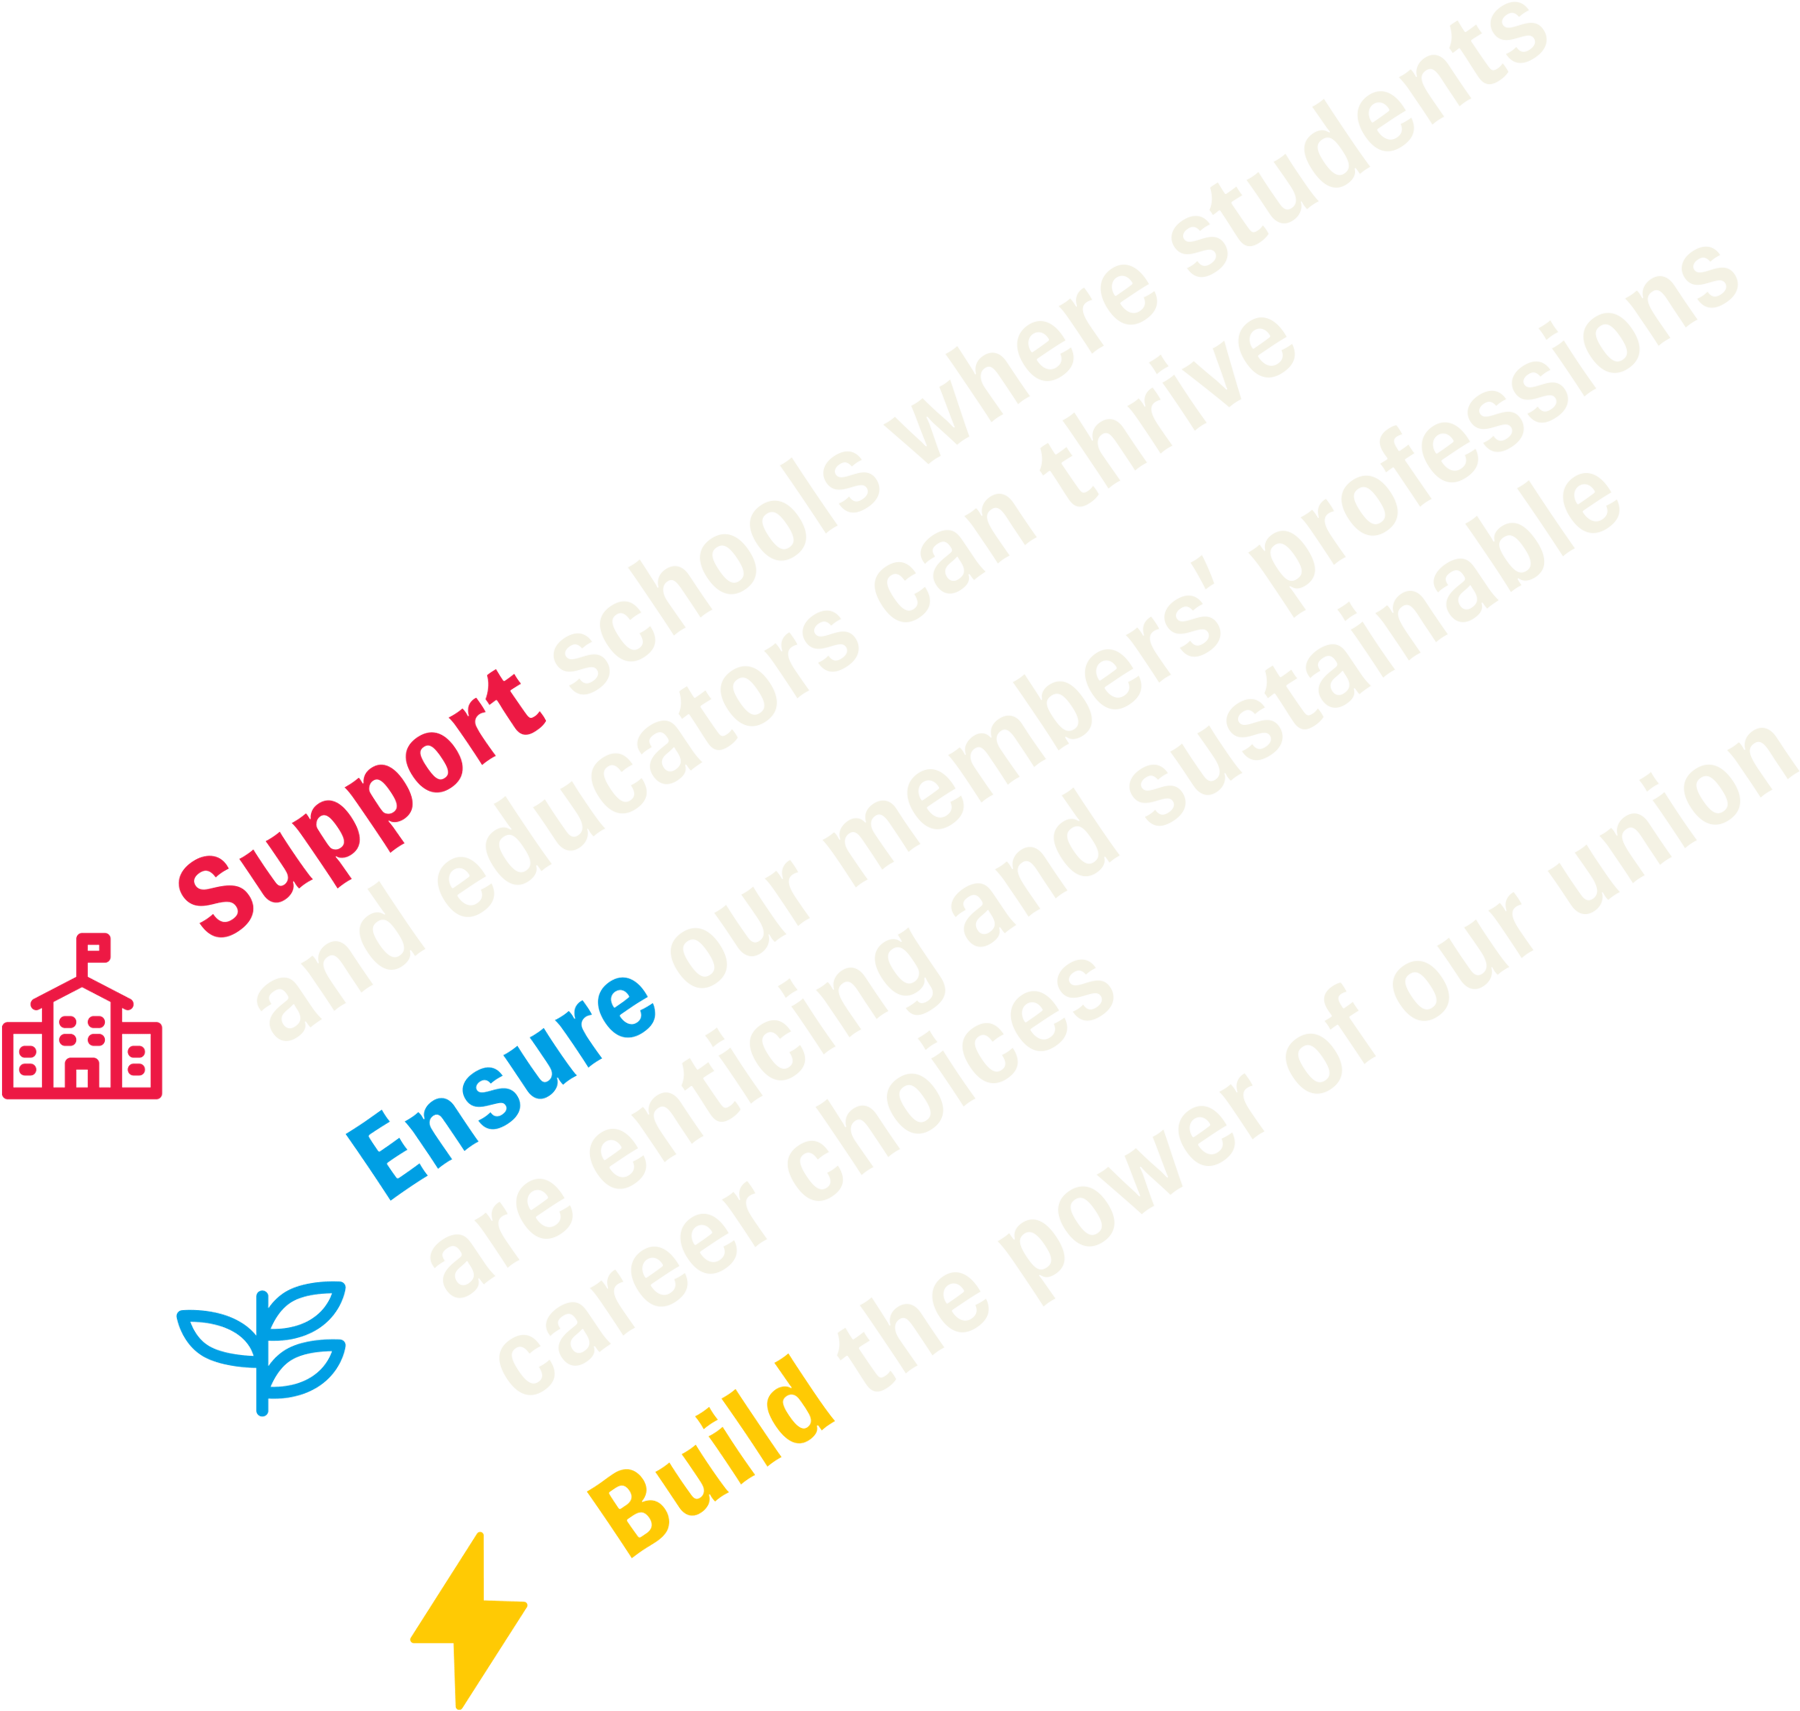 Support schools where students and educators can thrive, Ensure our members’ professions are enticing and sustainable career choices, Build the power of our union